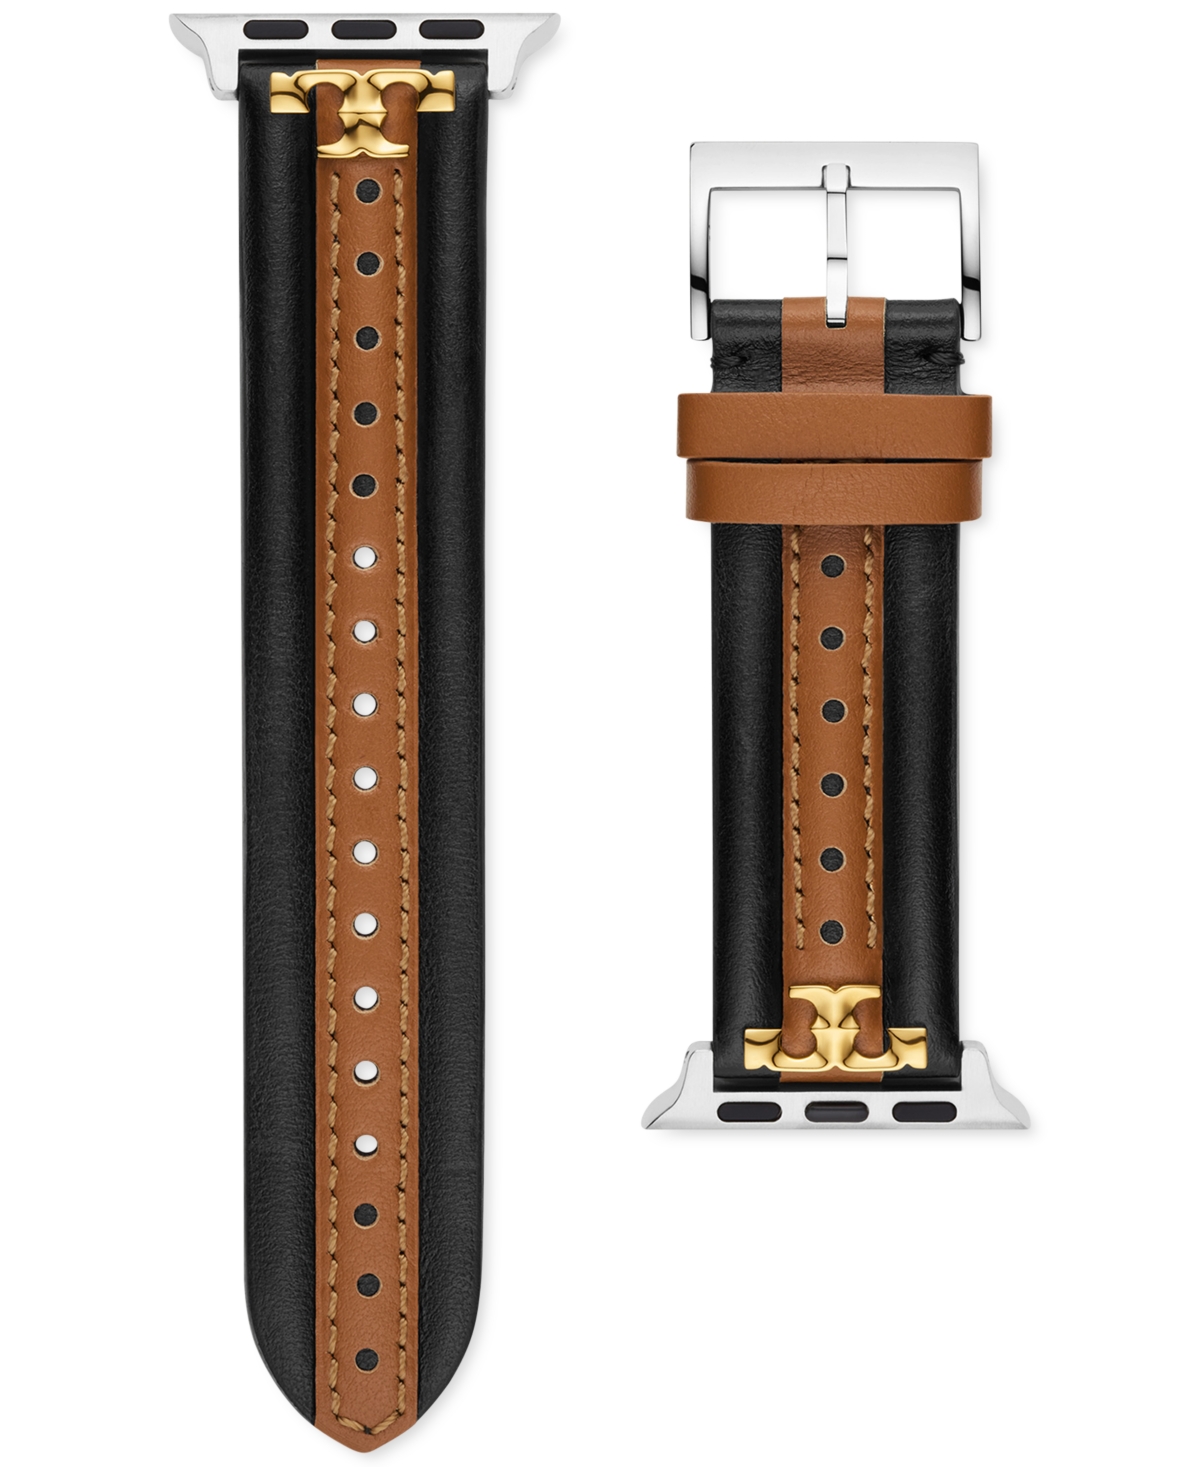 TORY BURCH THE KIRA BLACK & LUGGAGE LEATHER STRAP FOR APPLE WATCH 38MM/40MM/41MM